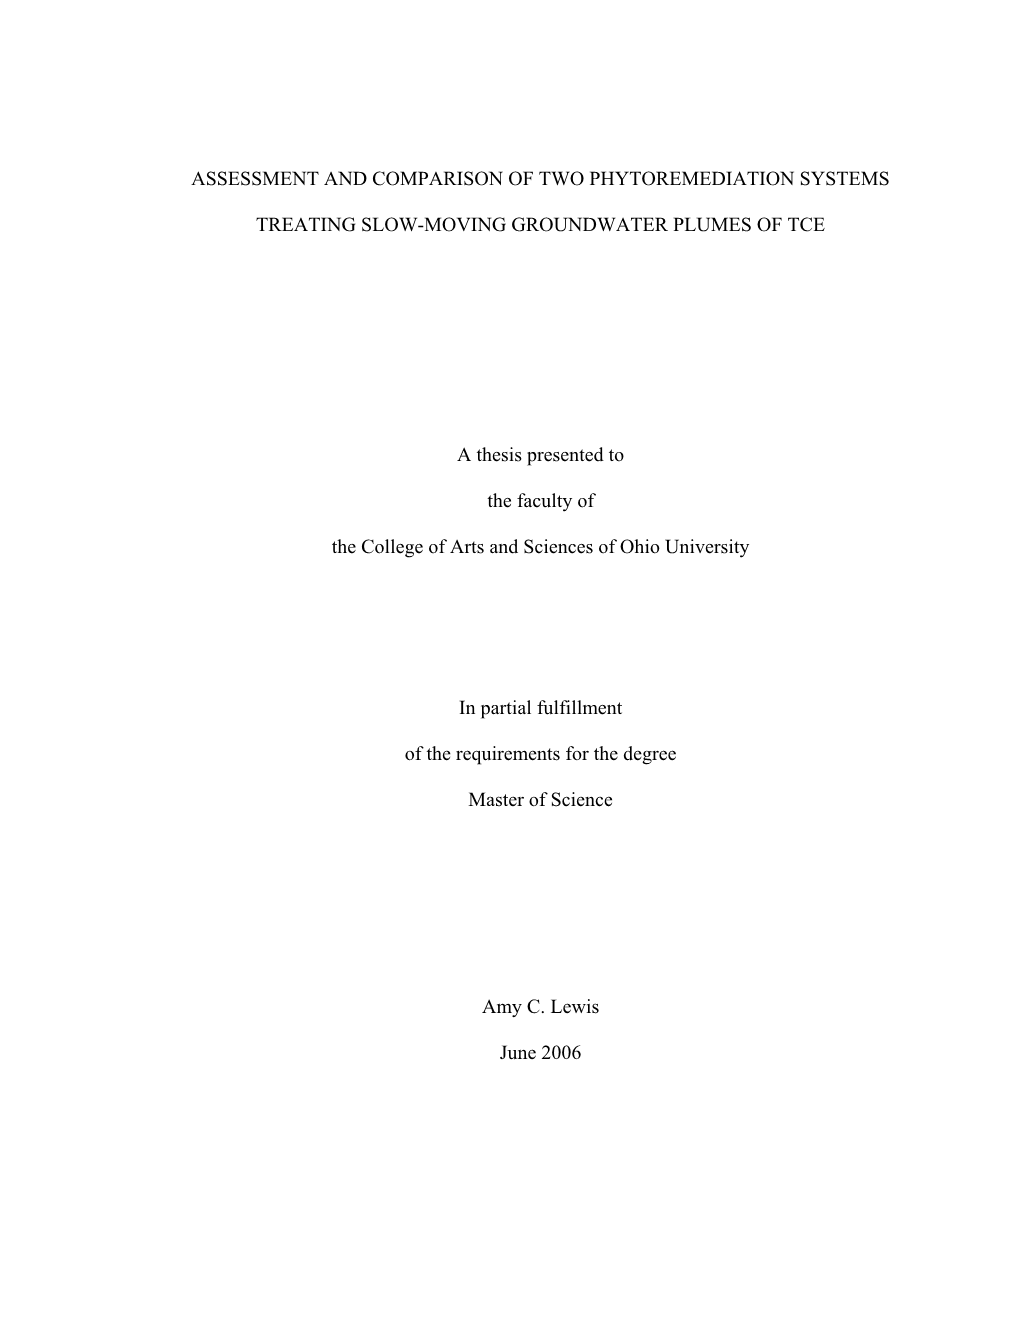 ASSESSMENT and COMPARISON of TWO PHYTOREMEDIATION SYSTEMS TREATING SLOW-MOVING GROUNDWATER PLUMES of TCE a Thesis Presented To